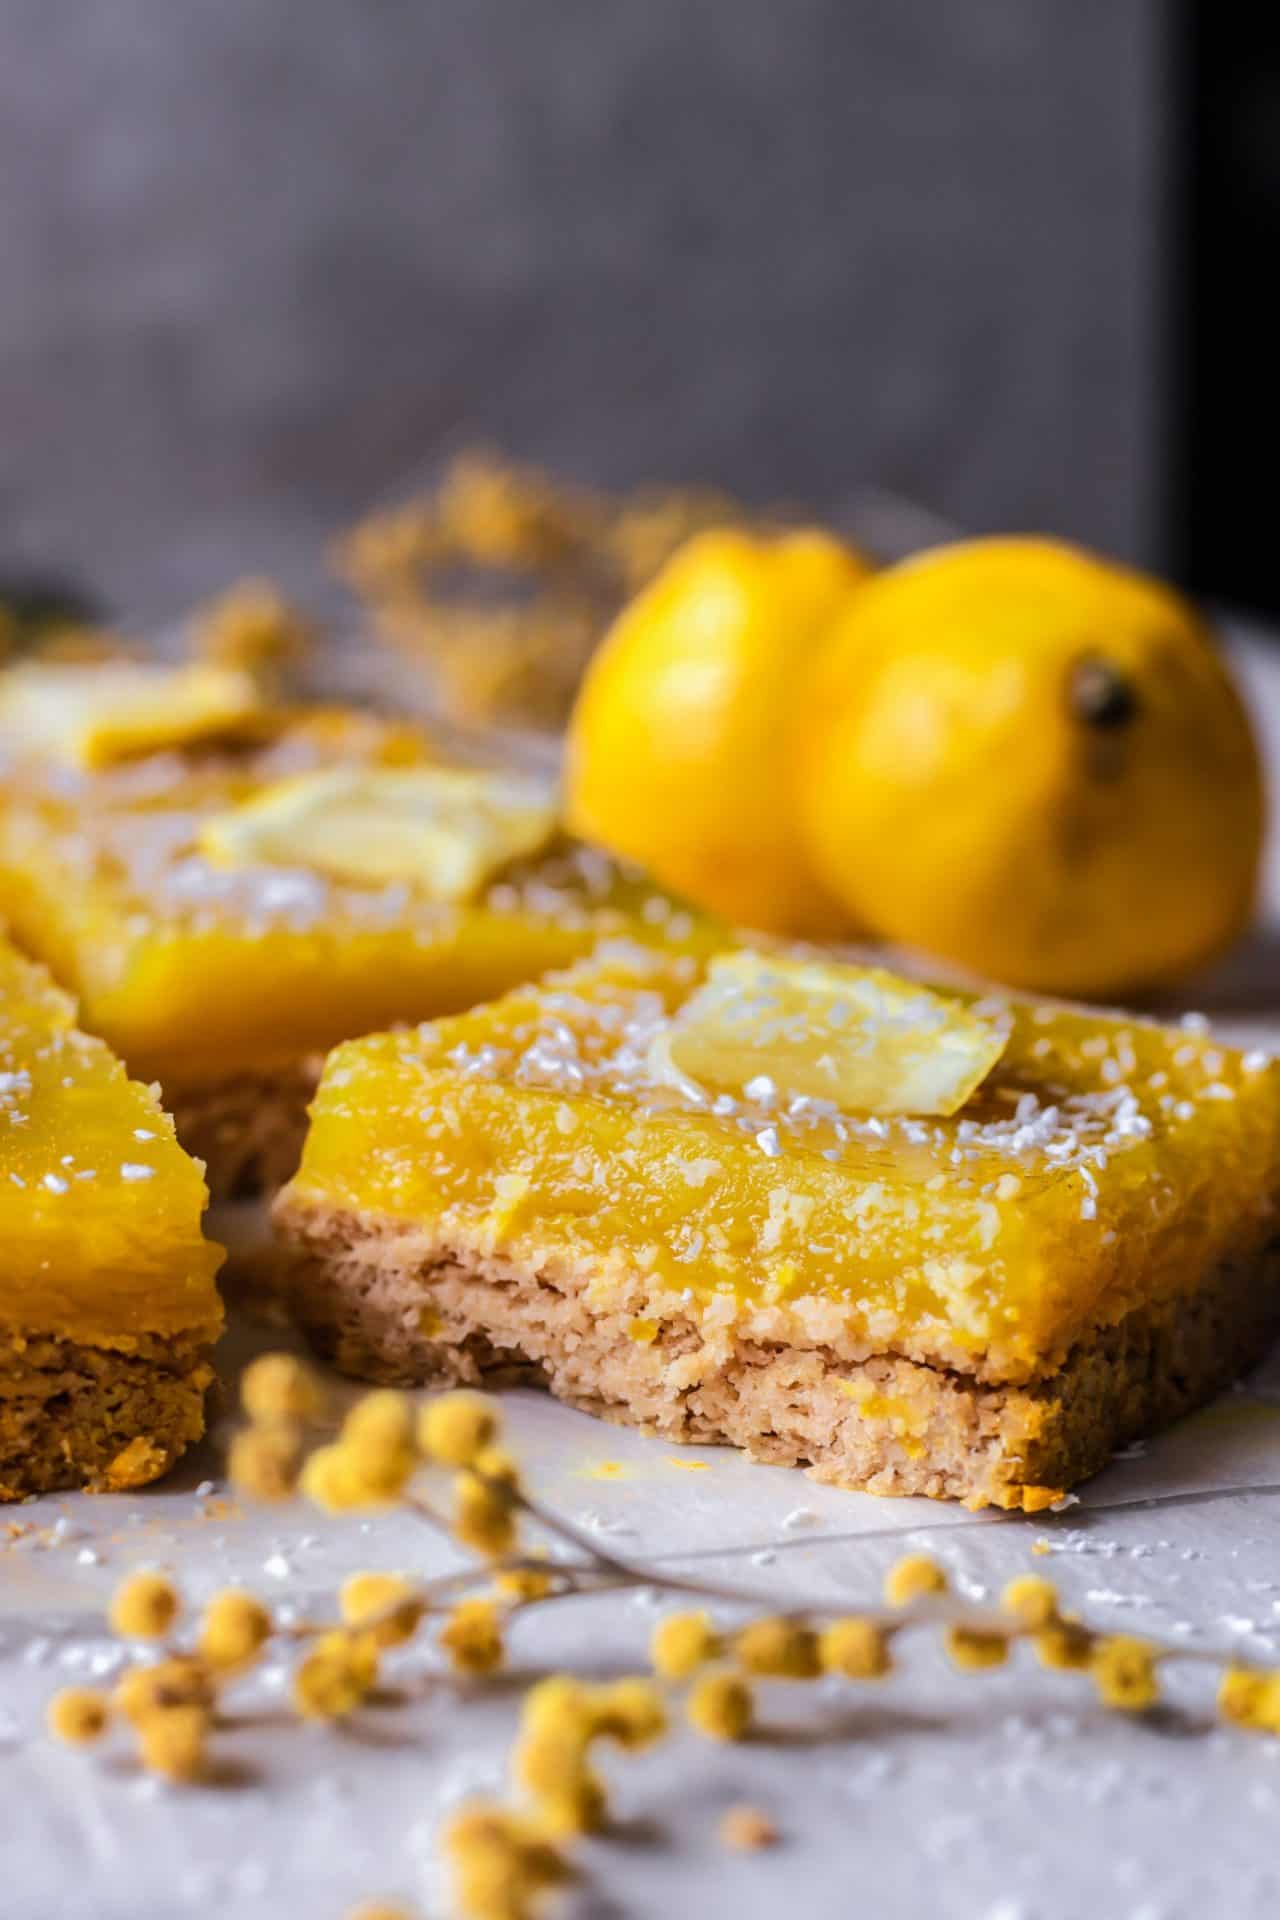 These Vegan Lemon Bars are incredibly refreshing, light, lemony, not too sweet, healthier than the traditional lemon bars and so delicious!